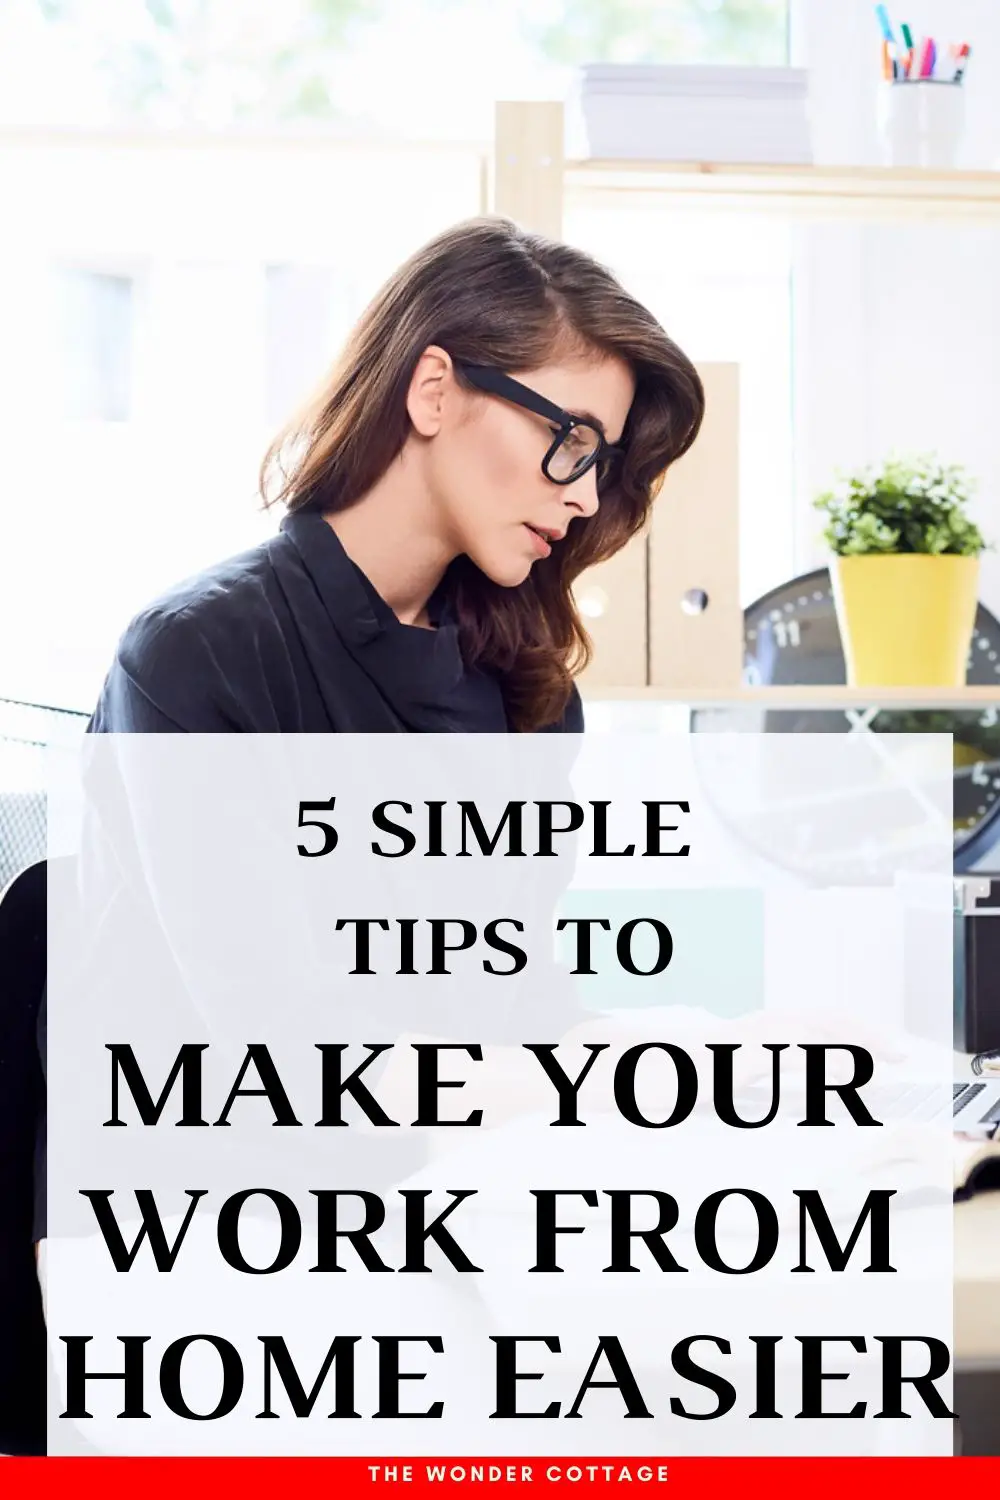 5 simple tips to make your work from home easier